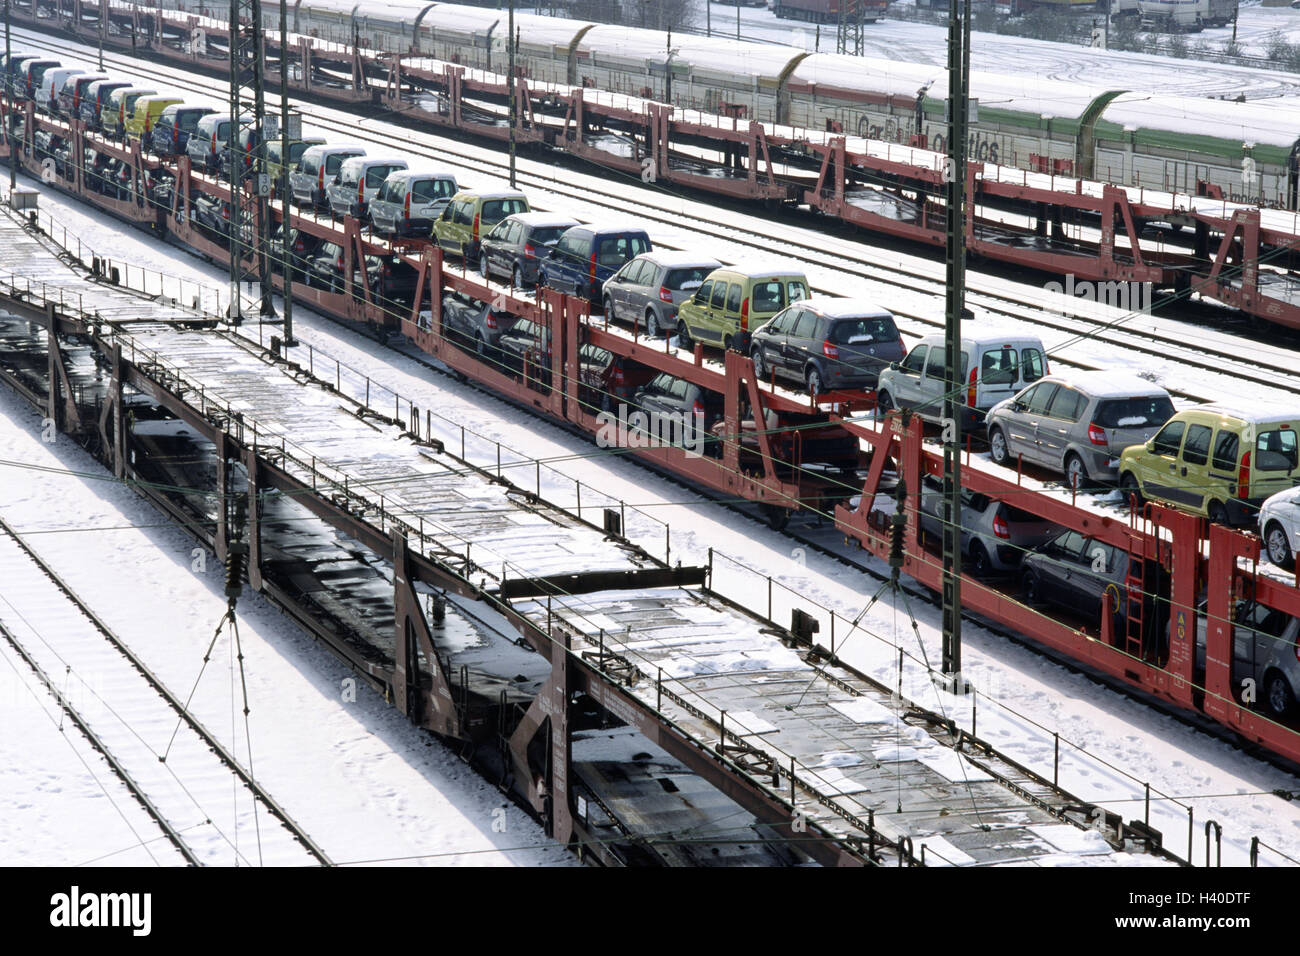 Goods train, new carriage transport, snow, carriages, good carriages, railway track, masts, overhead contact line, rail transport, section, traffic, railway, rail traffic, trajectory traffic, rail transport, rails, railroad tracks, tracks, commercial tran Stock Photo